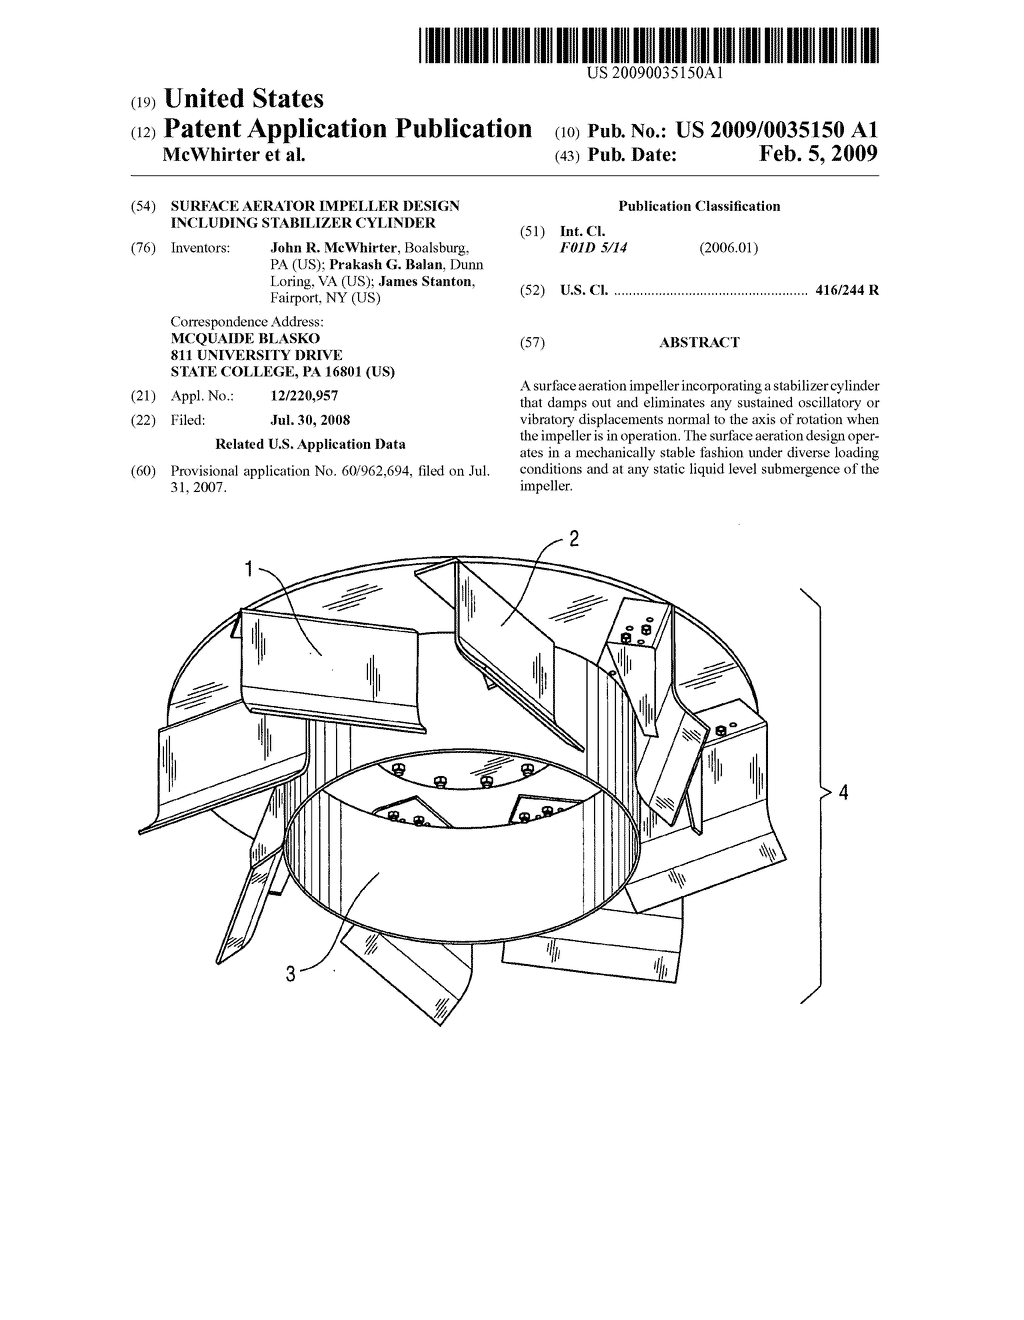 Surface aerator impeller design including stabilizer cylinder - diagram, schematic, and image 01